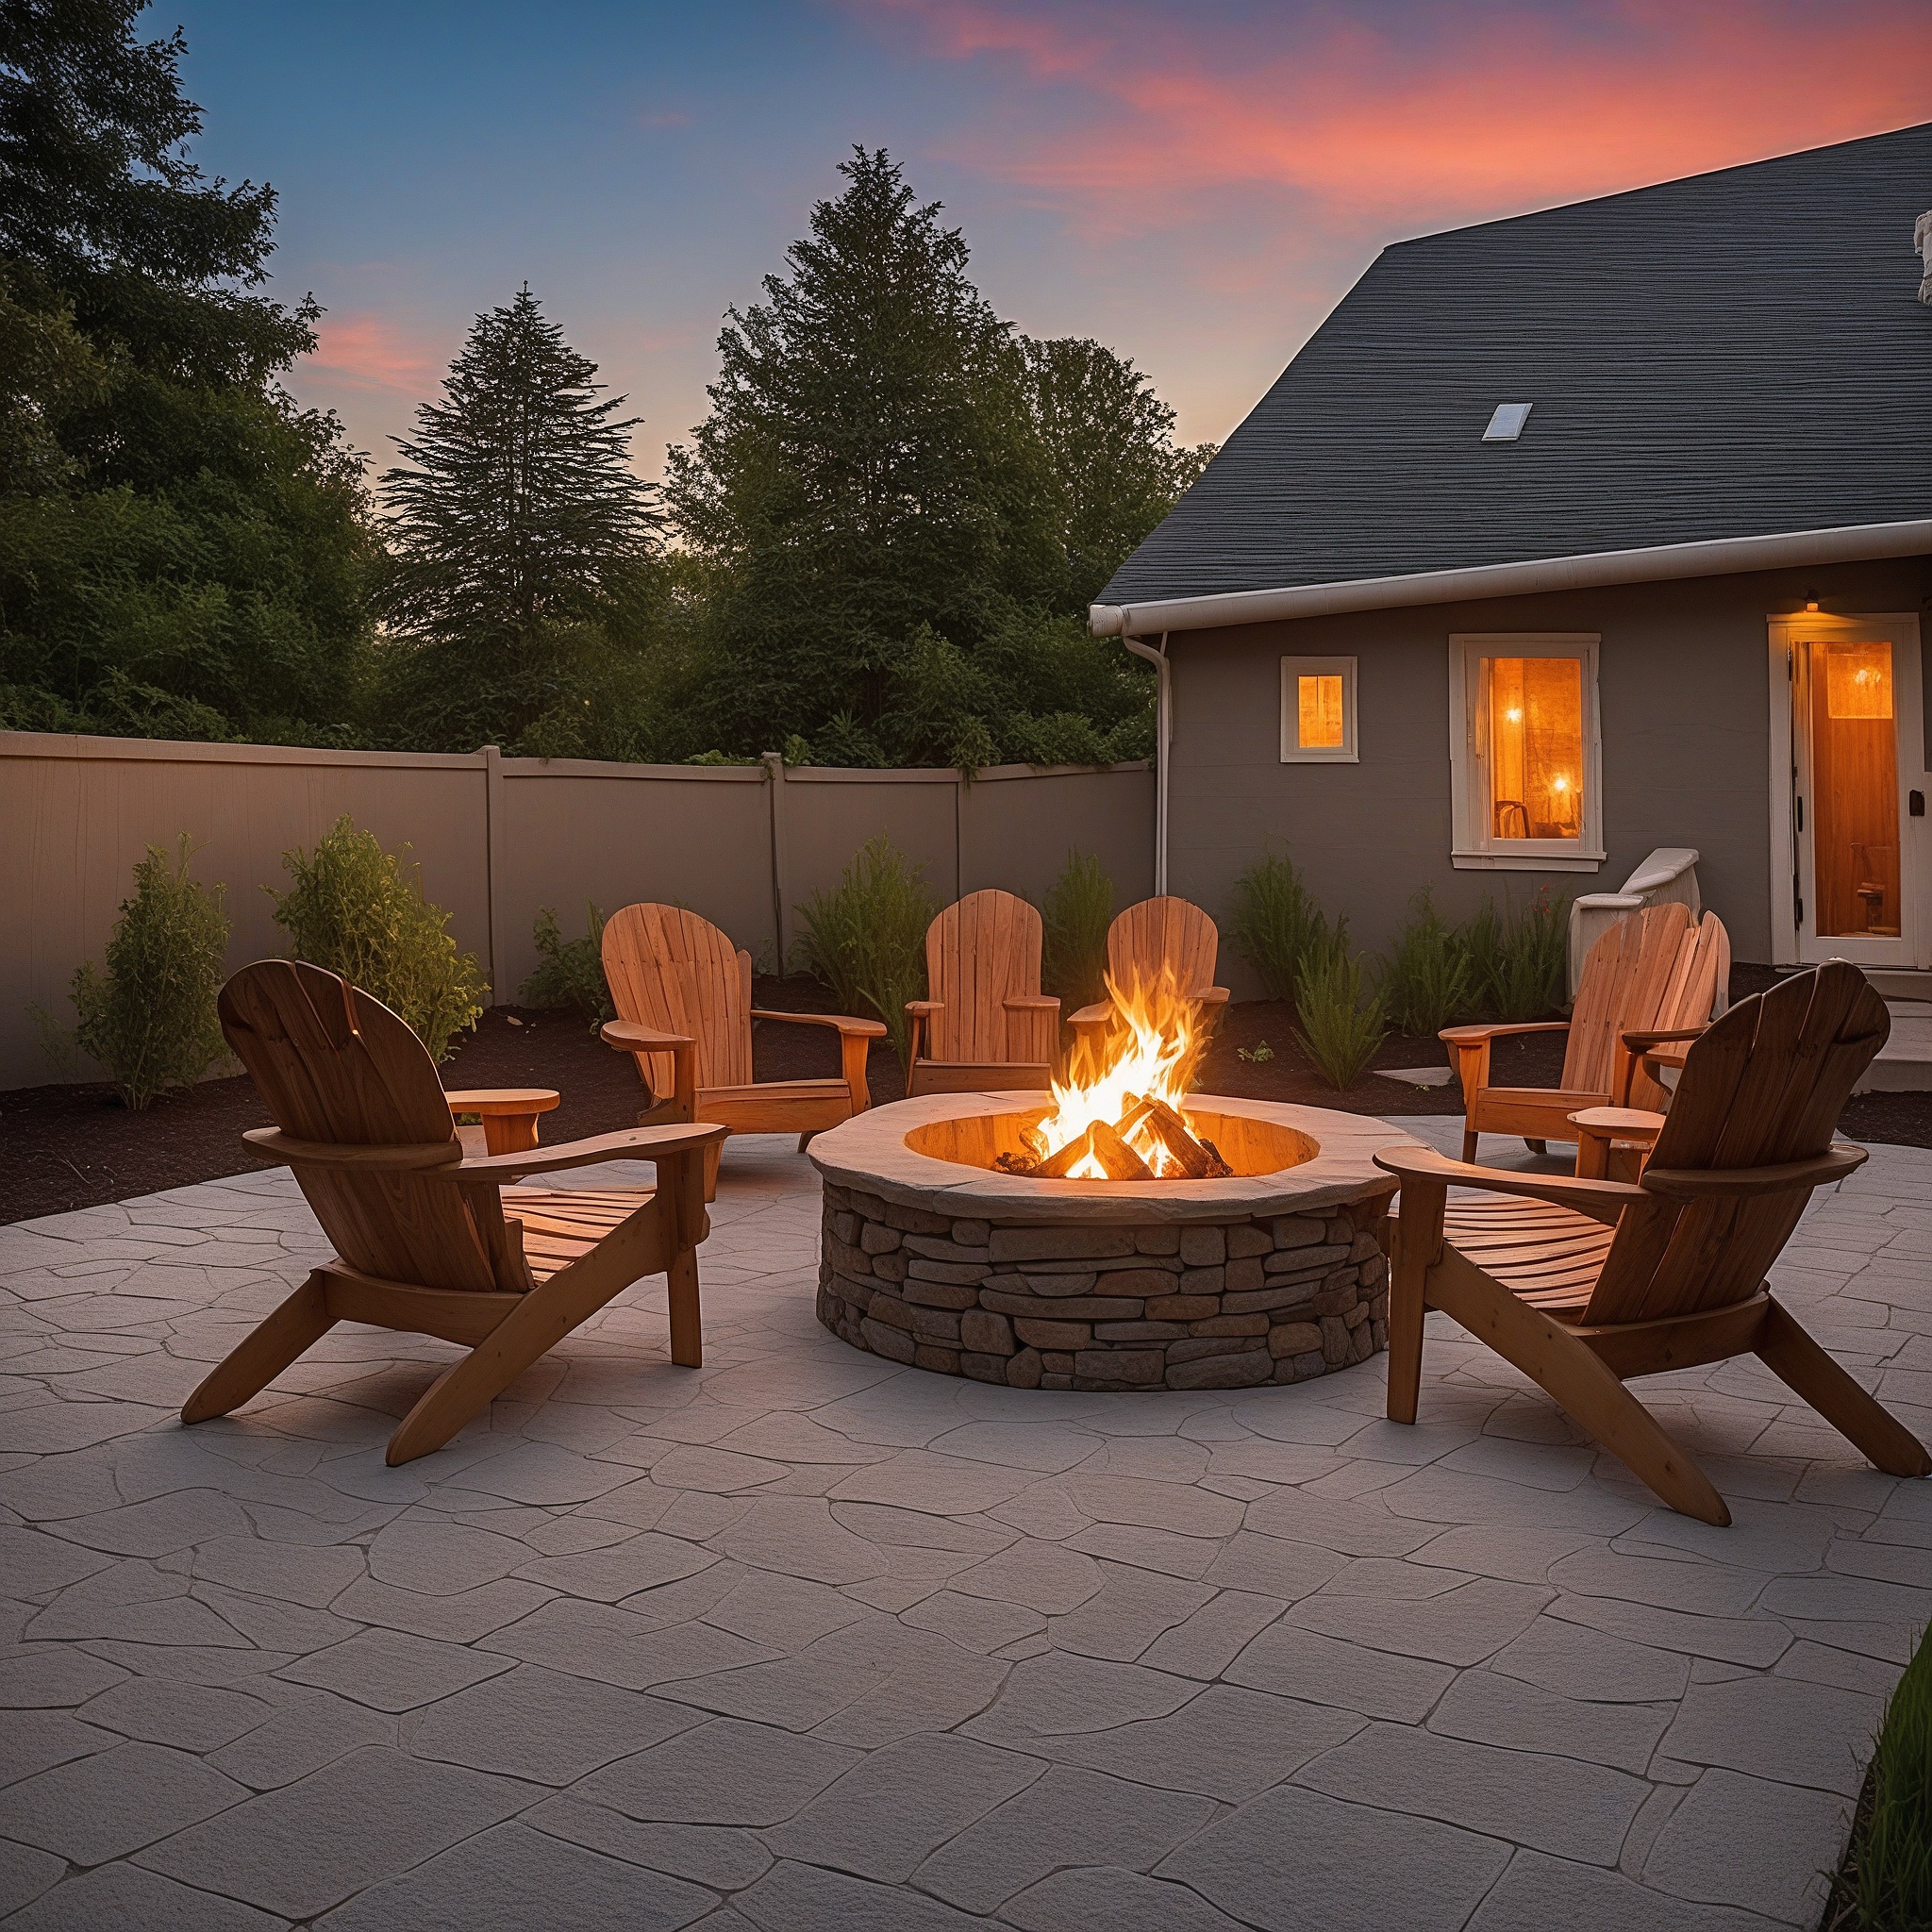 Built-in Fire Pit With Adirondack Chairs